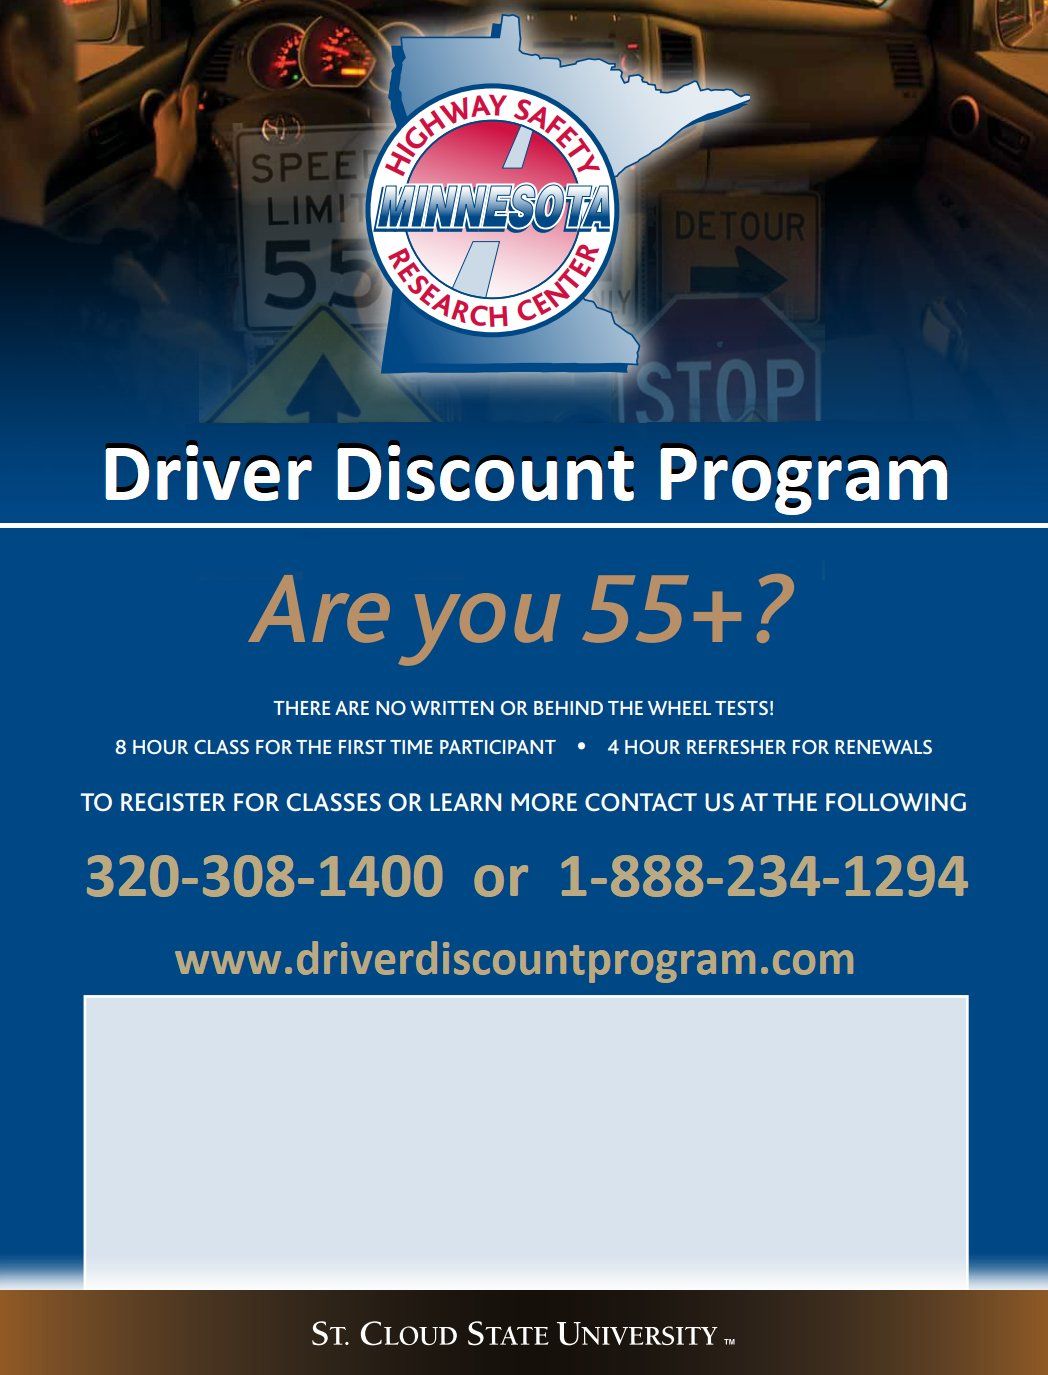 Initial 8-hour 55+ Driver Discount Class at the Crosslake Community Center